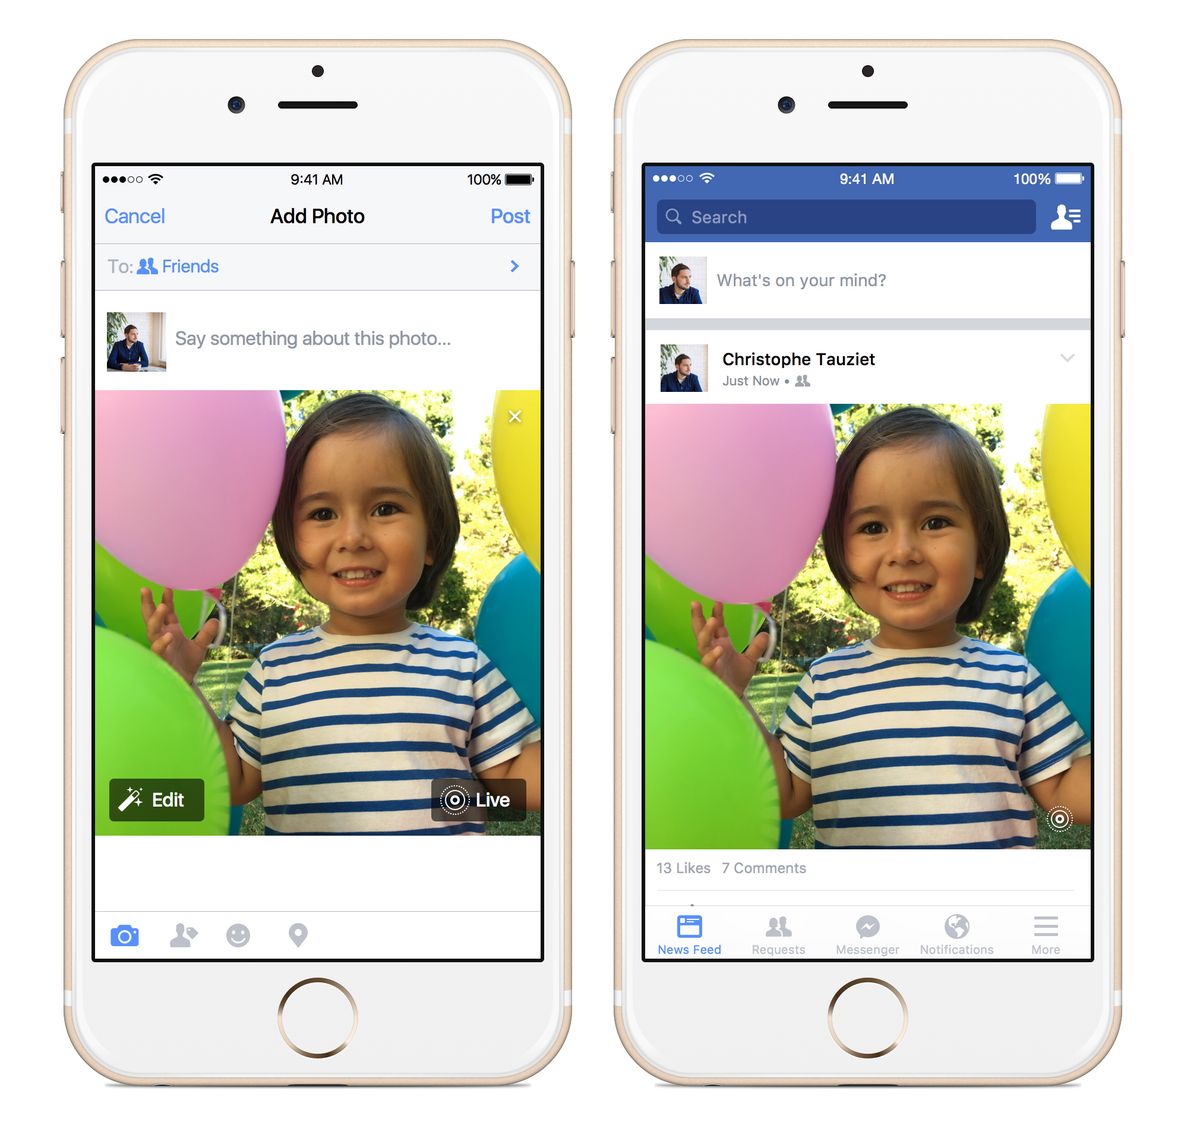 FILE - This file photo provided by Apple and Facebook demonstrates the posting of an animated photo using Facebooks new app, left, and the viewing of it, right, on an iPhone. The latest iPhones come with the ability to turn still images into video, known as Live Photos. (Courtesy of Apple and Facebook via AP, File) (AP)